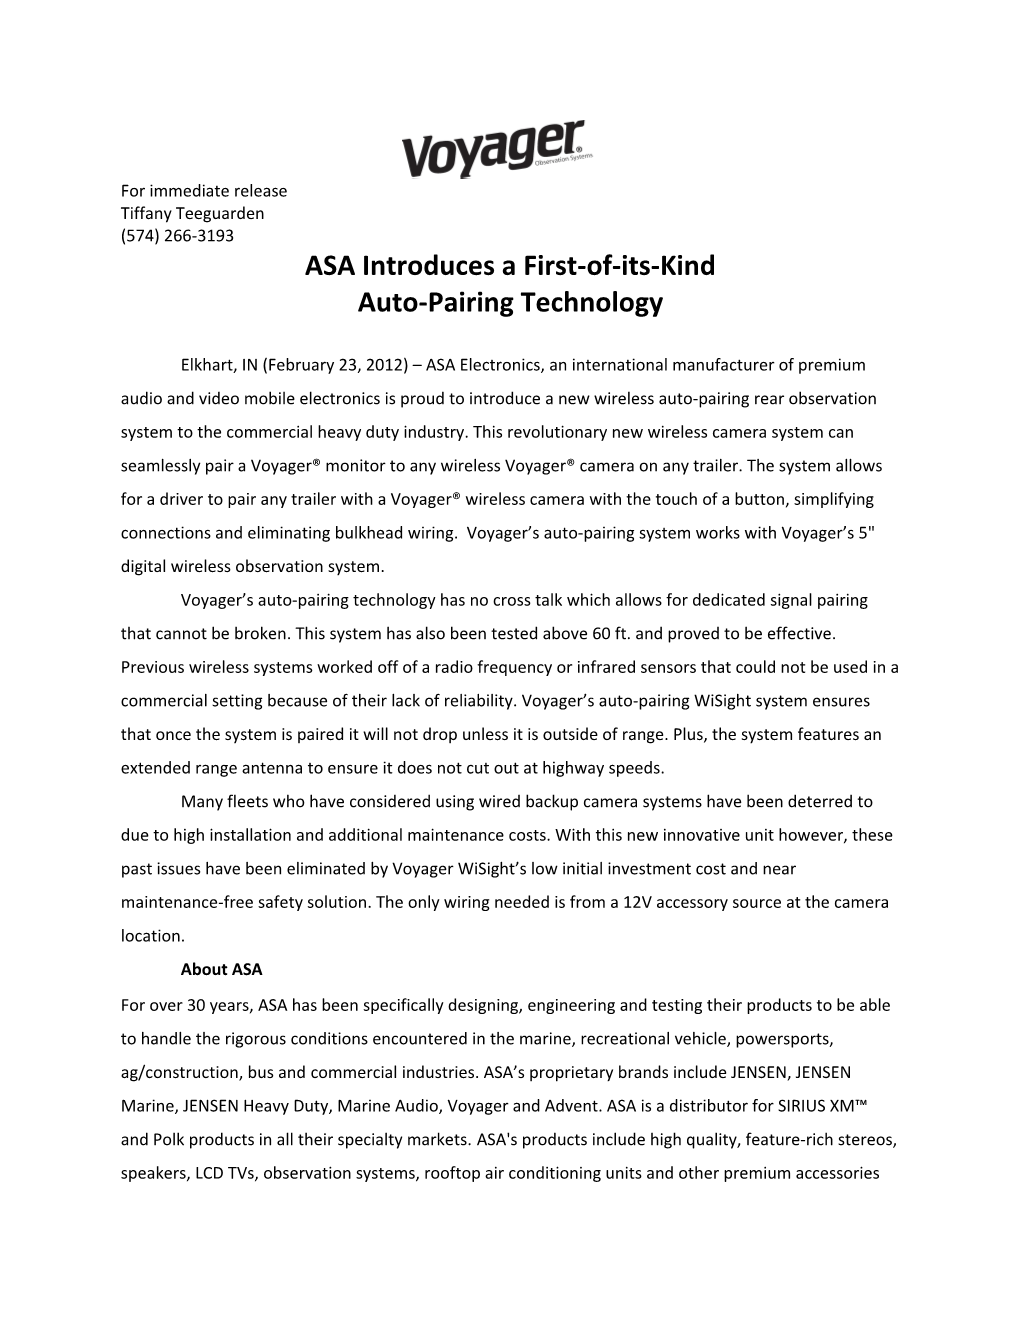 ASA Introduces a First-Of-Its-Kind Auto-Pairing Technology